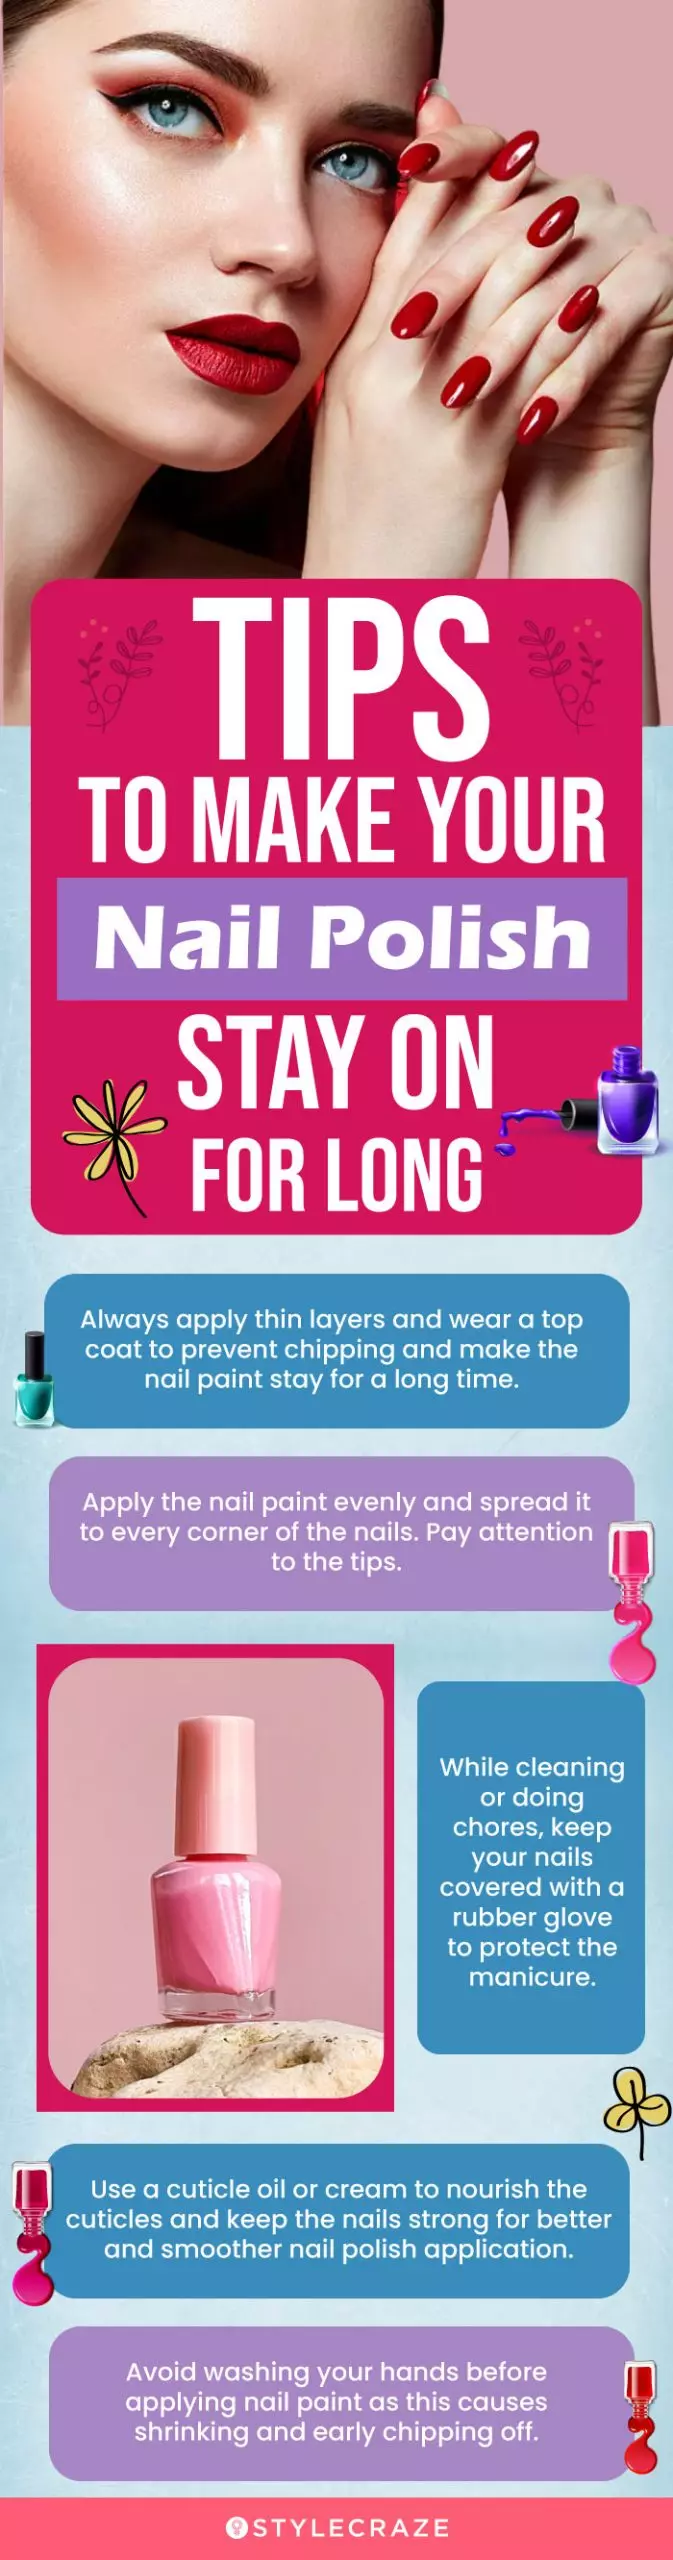 Tips To Make Your Nail Polish Stay On For Long